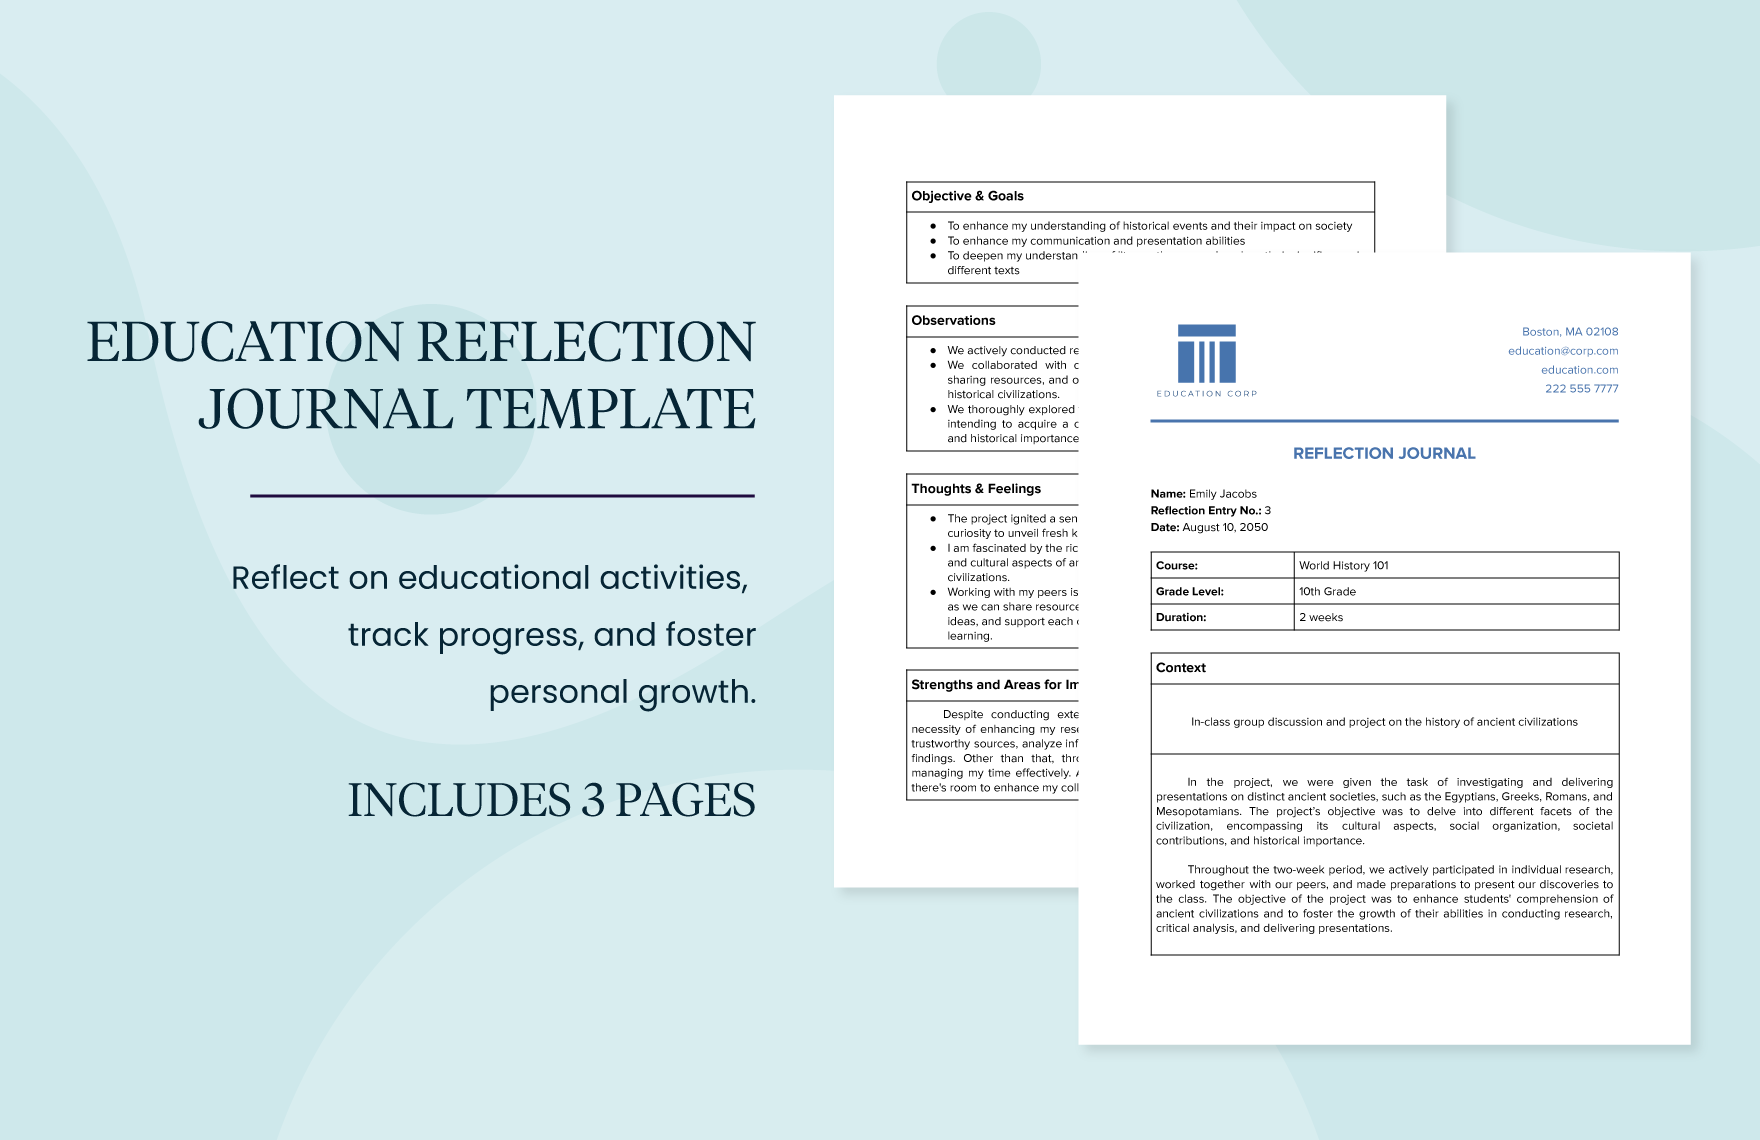 Education Reflection Journal Template in Word, Google Docs, PDF